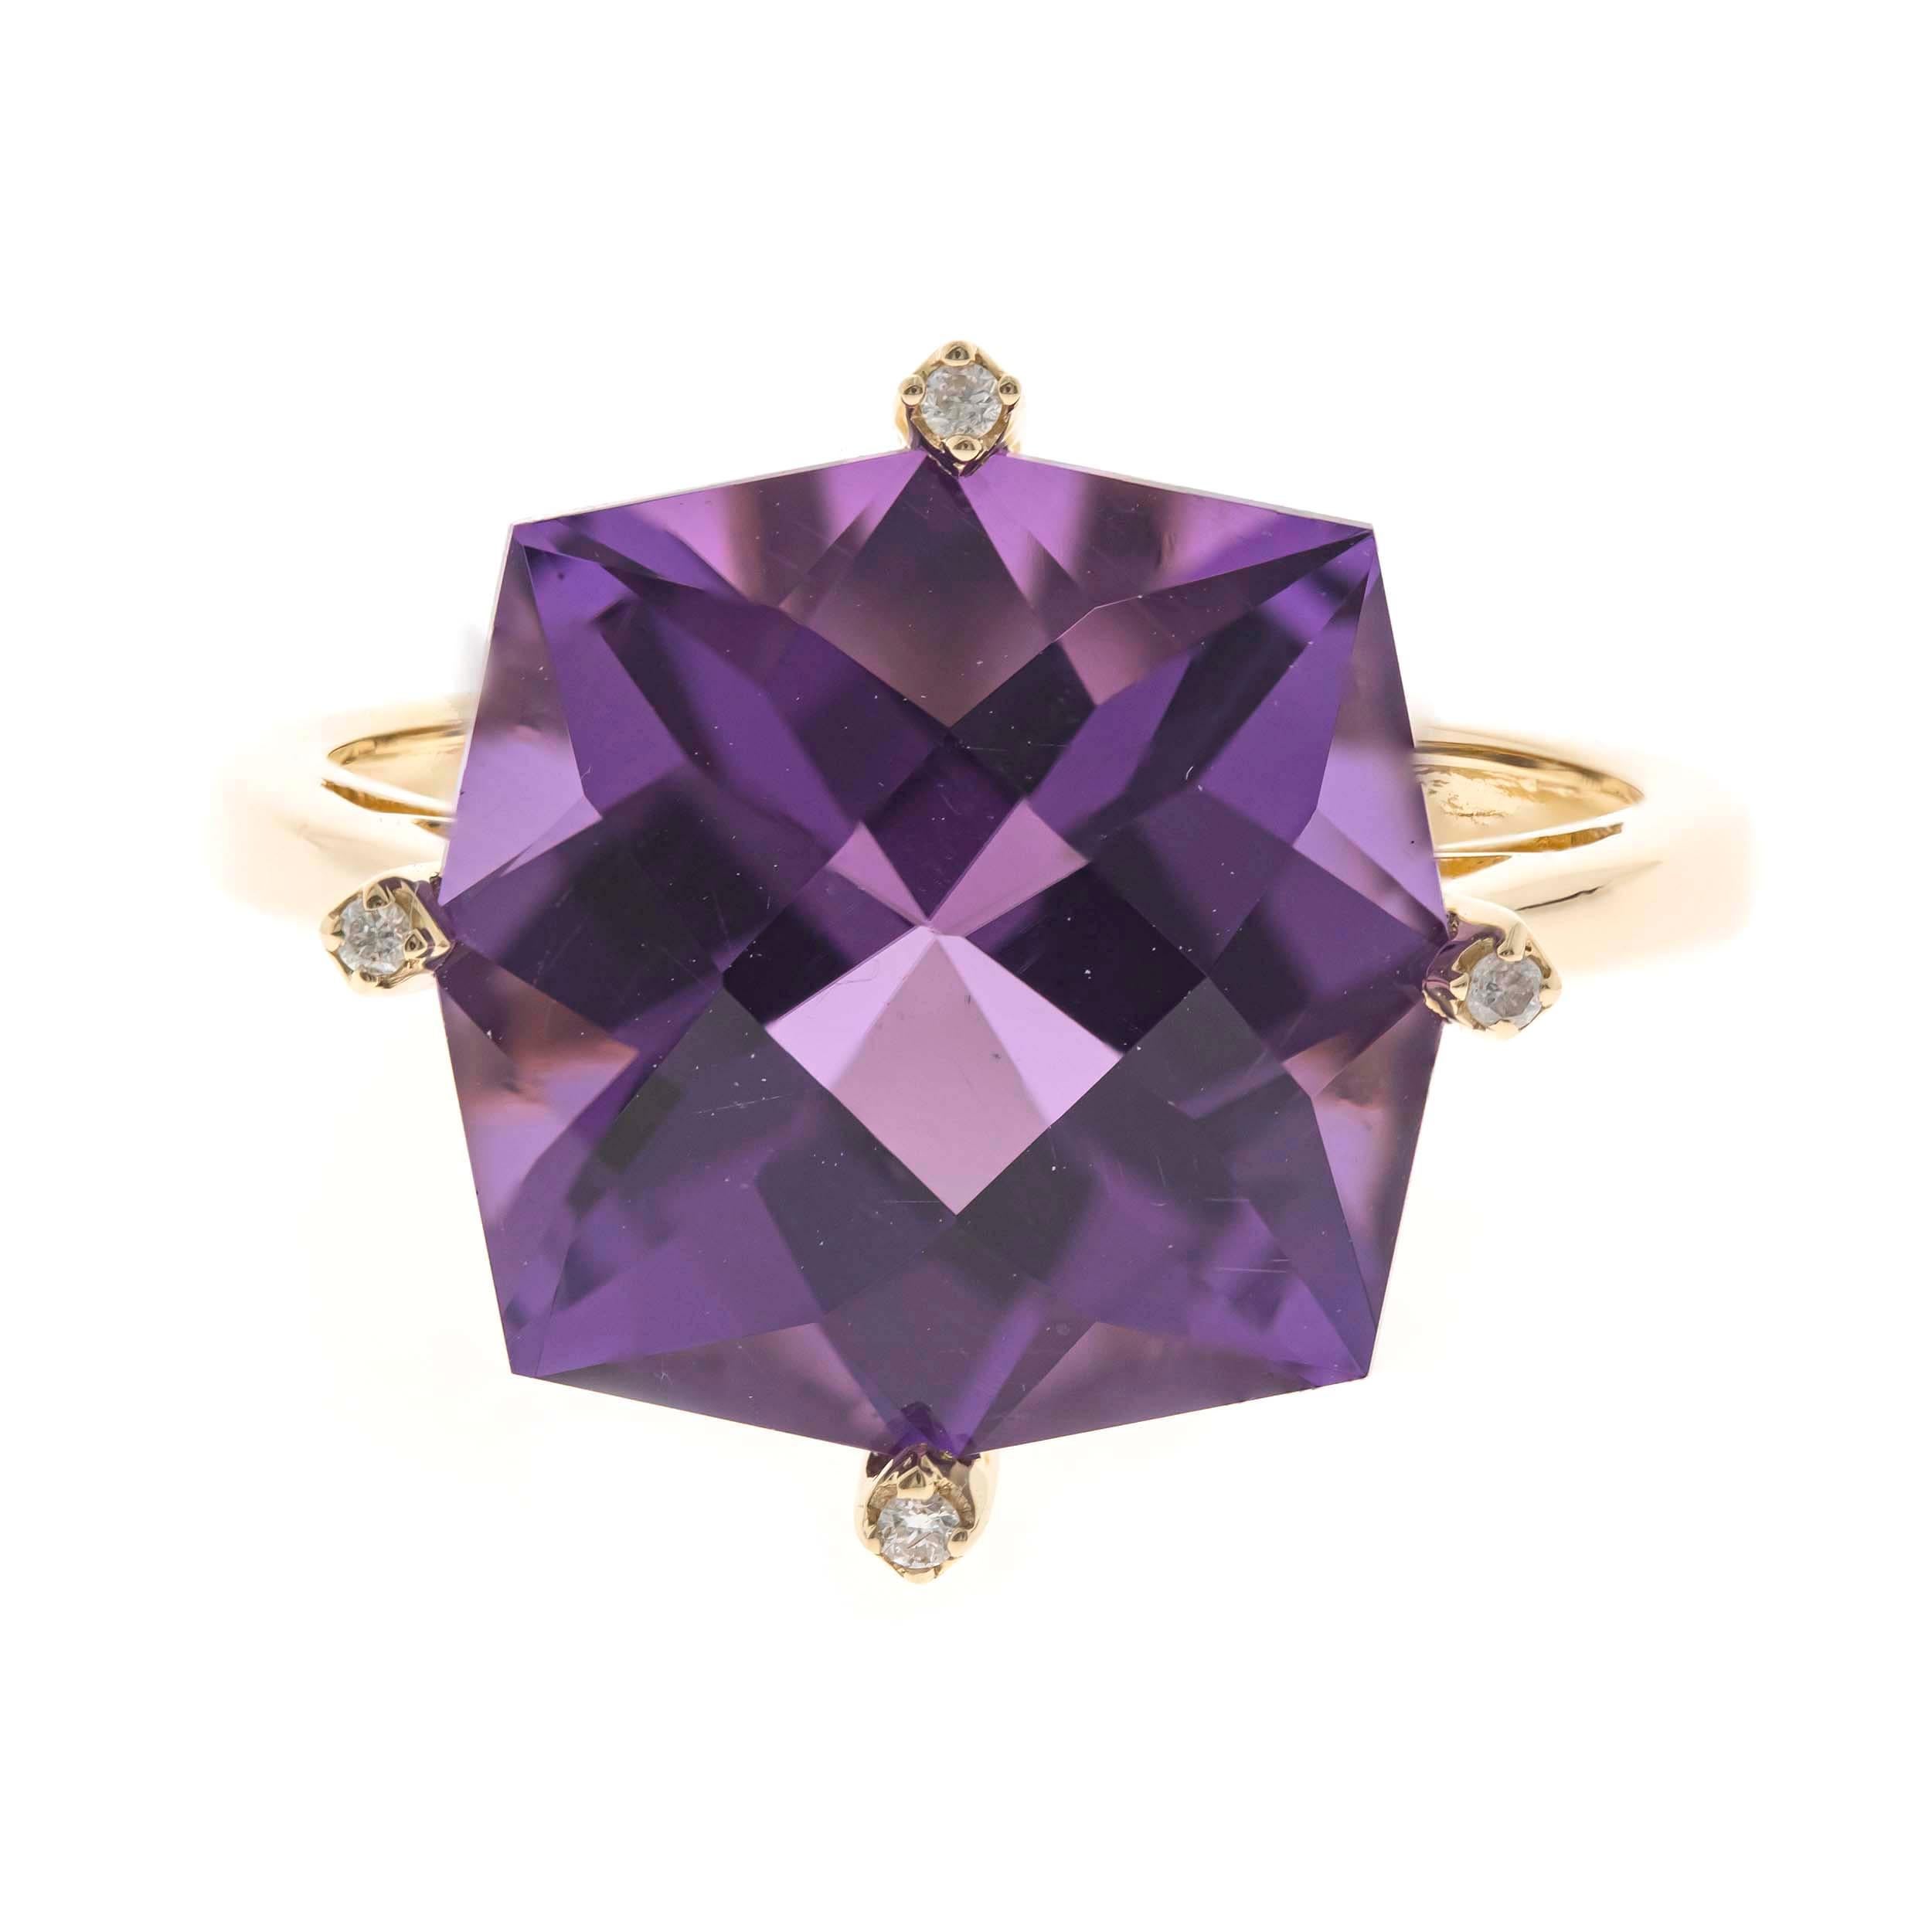 Trillion Cut 5.42 carat Cushion-cut Amethyst With Diamond accents 14K Yellow Gold Ring. For Sale